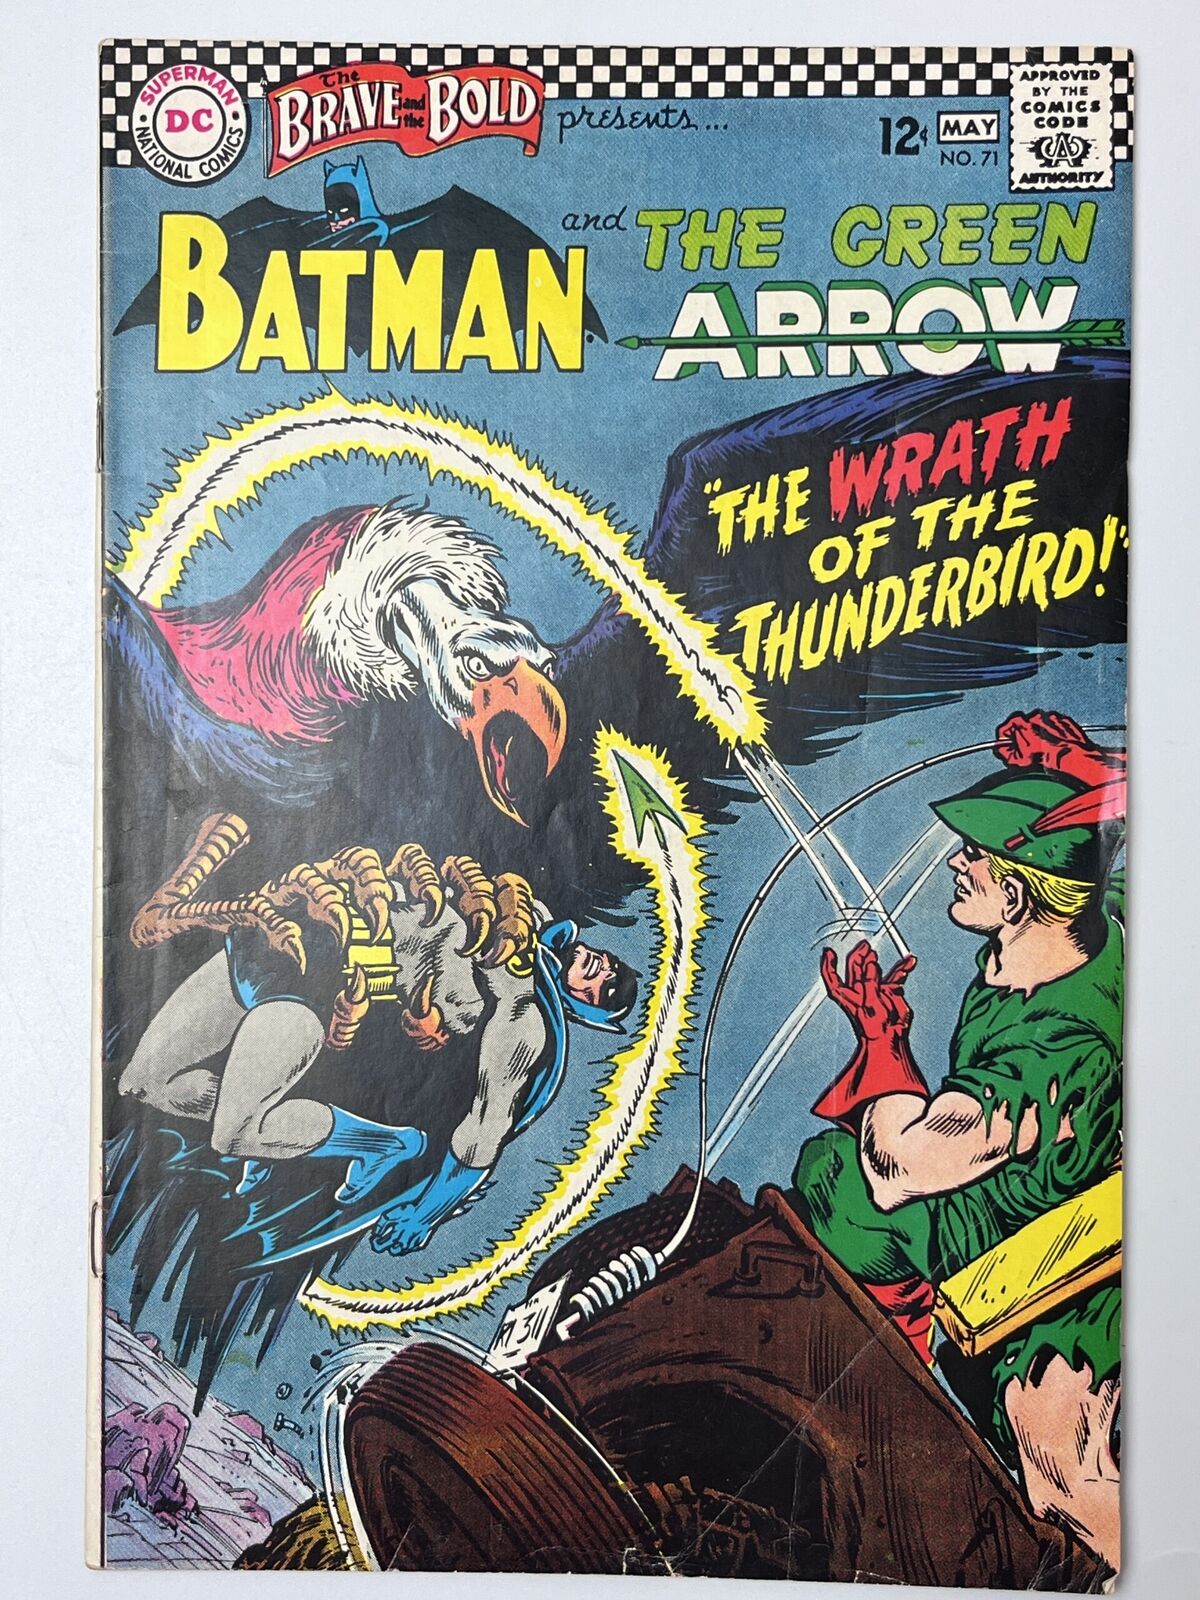 Brave and Bold #71 (1967) in 3.5 Very Good-